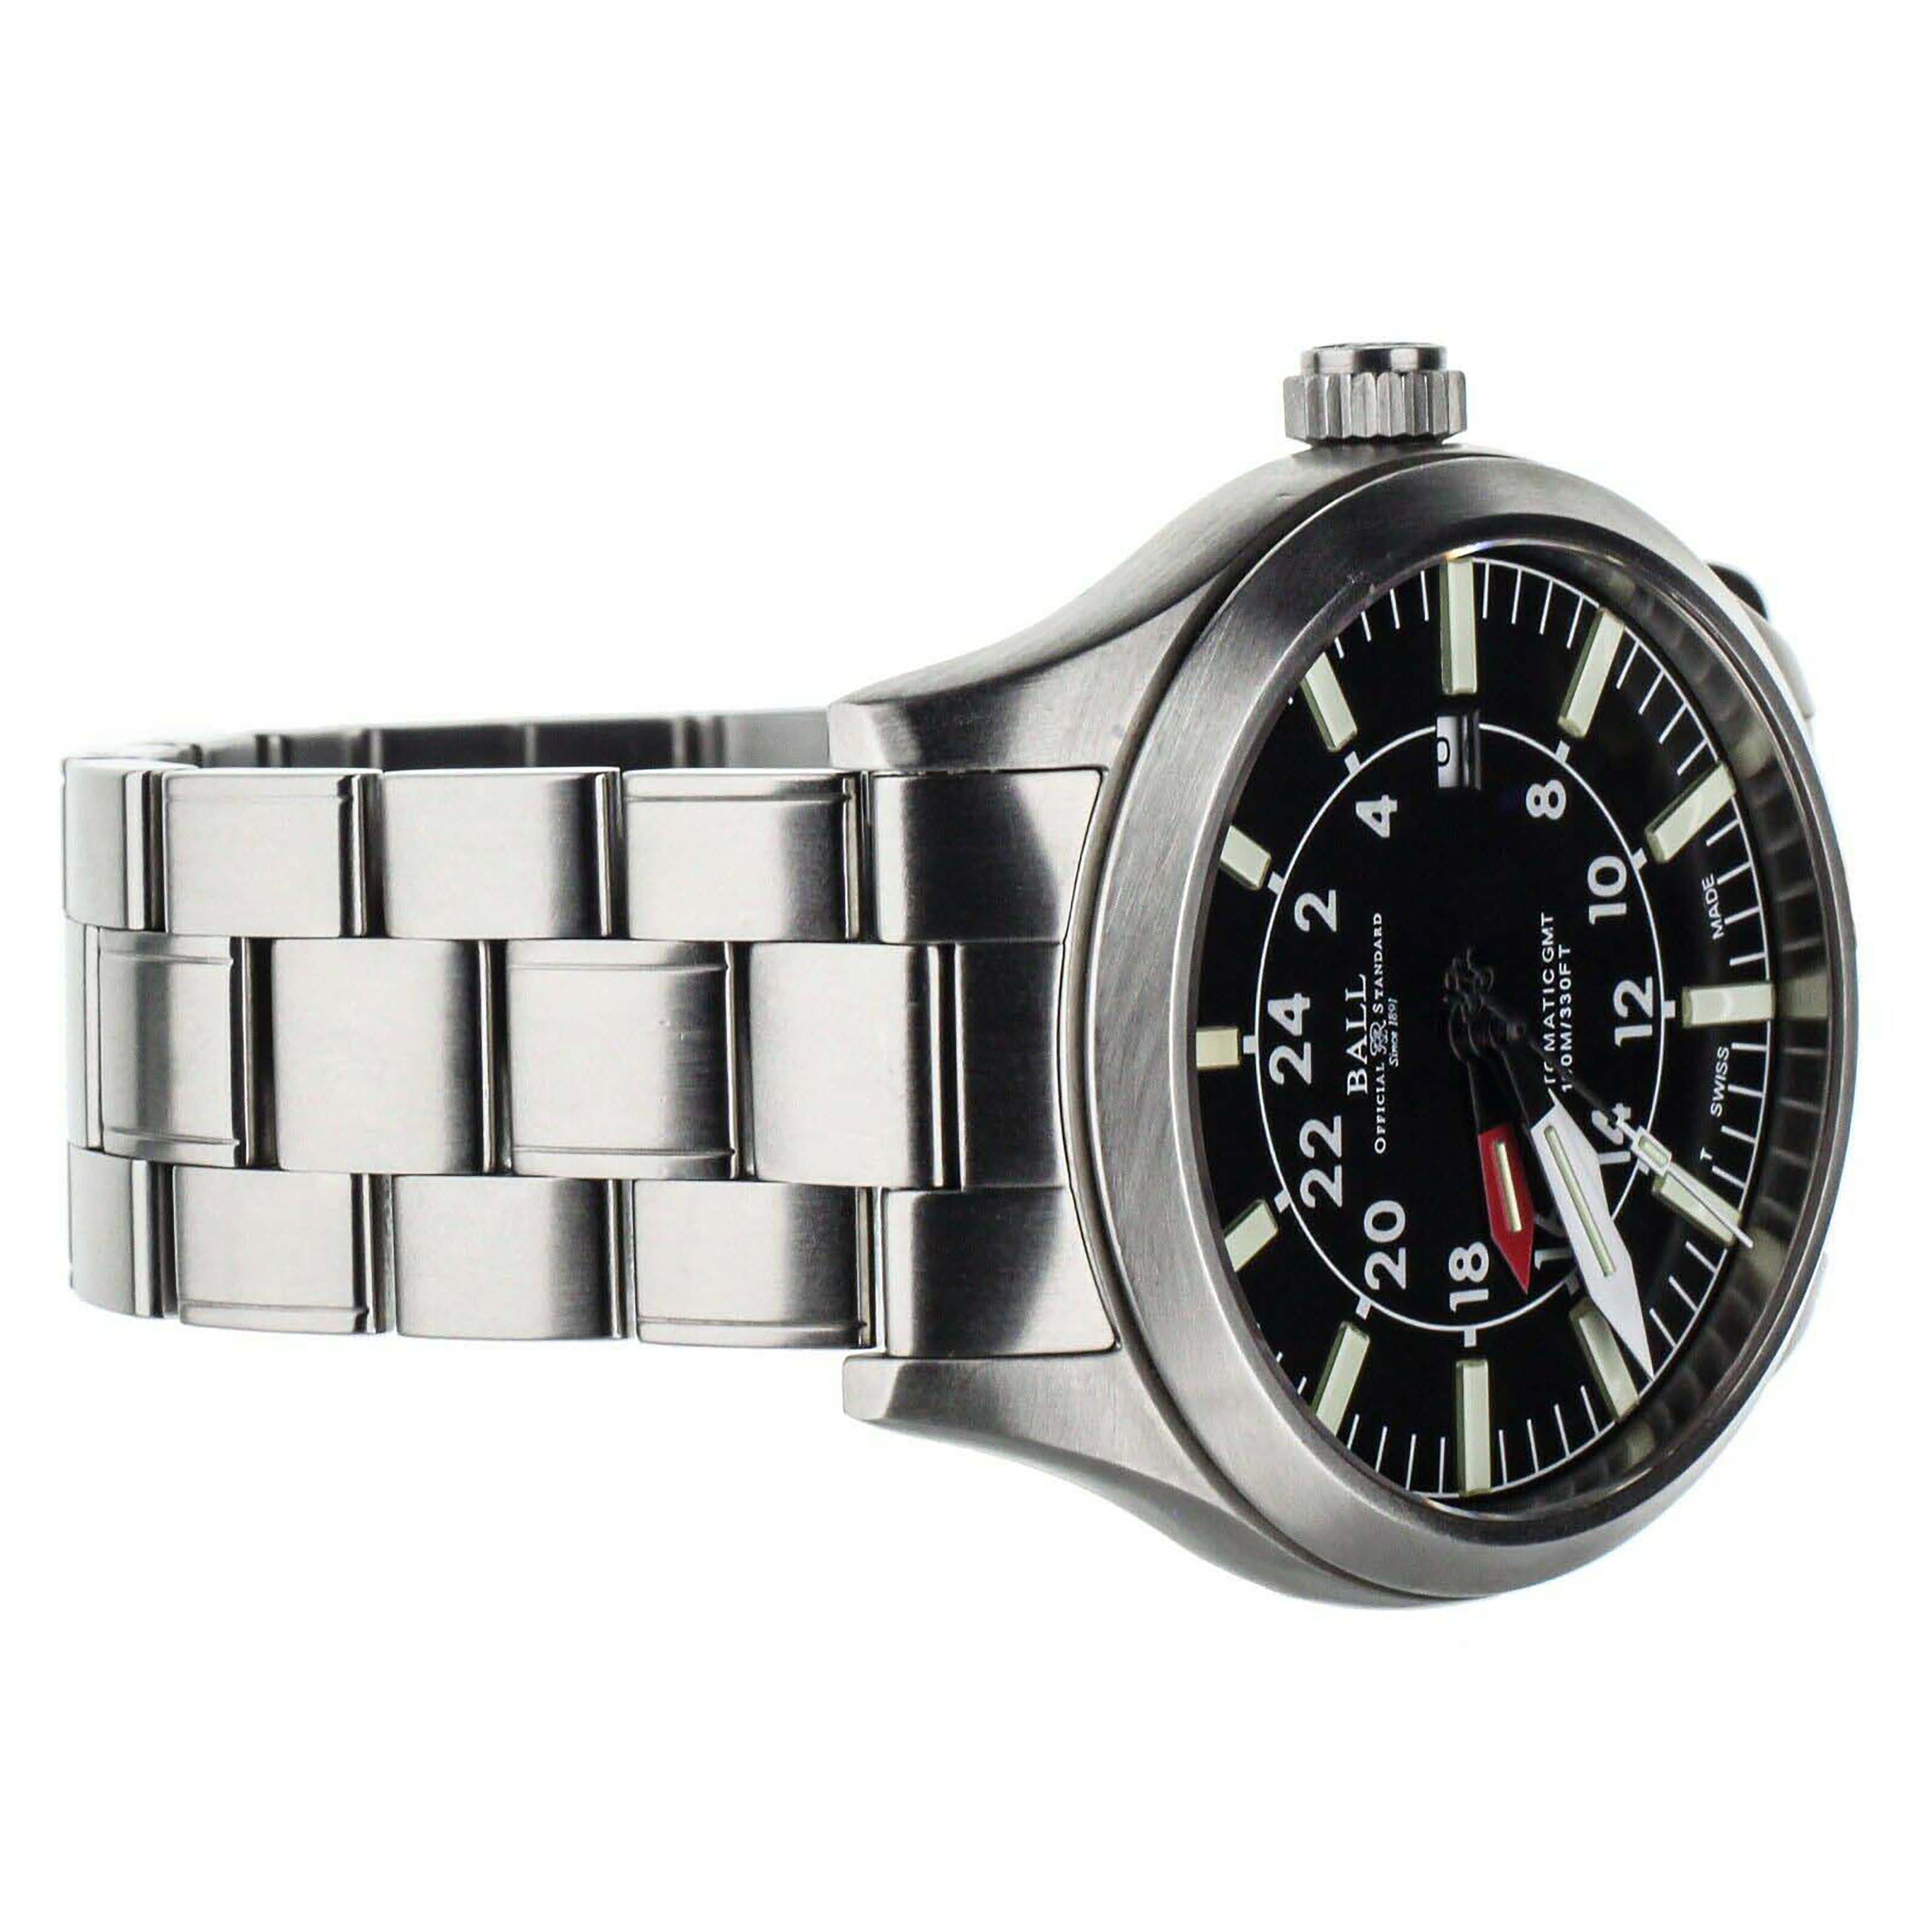 Super Engineer II compatible with Seiko Turtle SRP777, V-Clasp B |  Taikonaut watch band